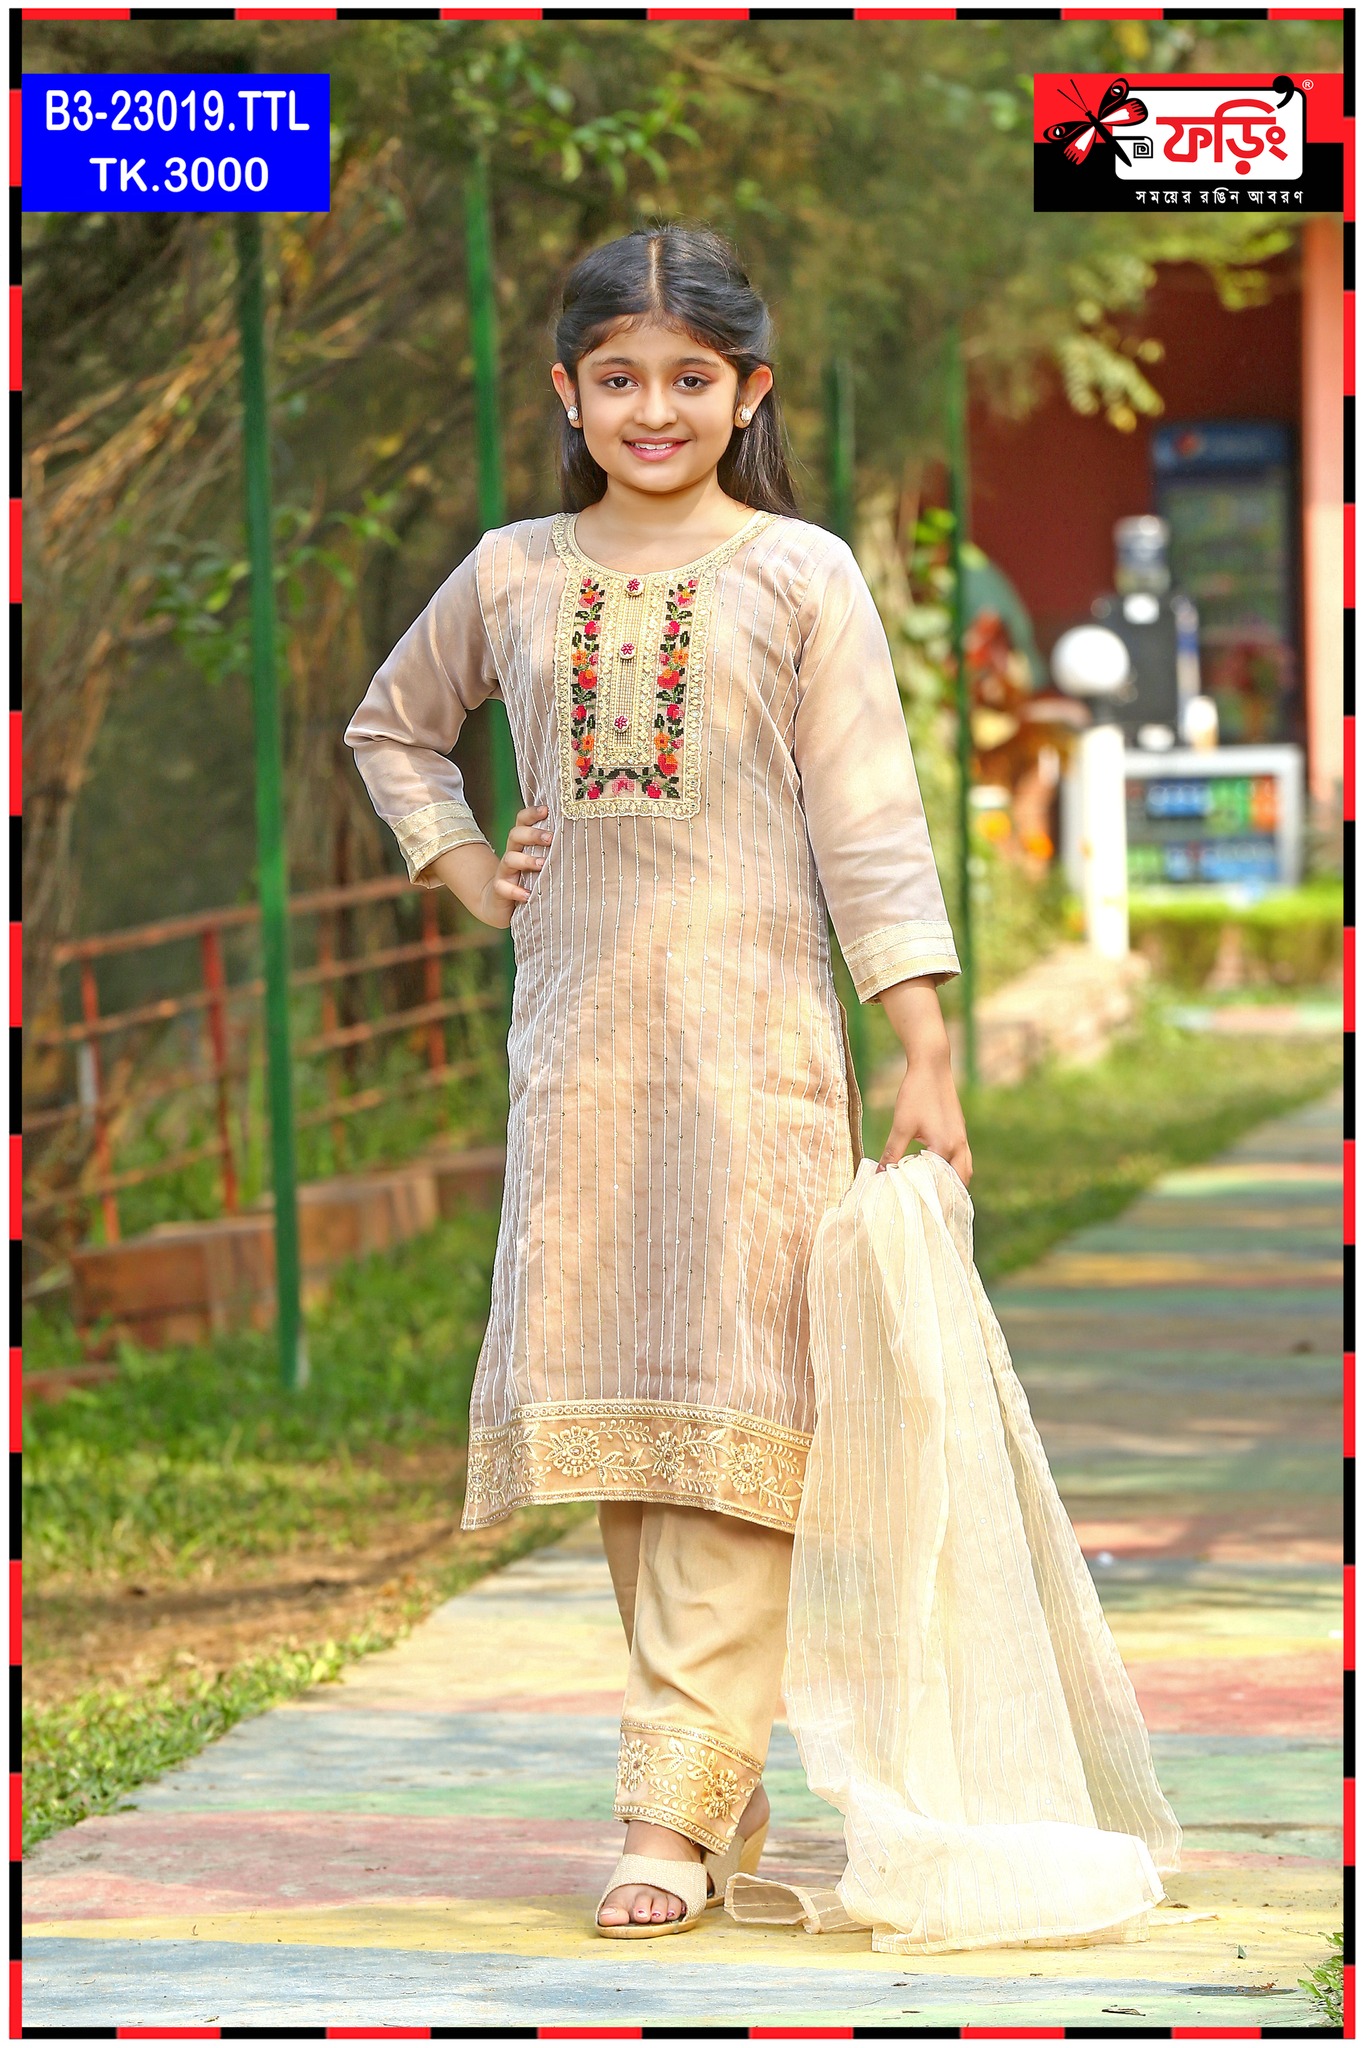 Kids Punjabi suit design ideas/Patiala salwar suits for girls/cute indian  outfits ideas for girls - Yo… | Patiala suit designs, Baby girl dress  patterns, Girl suits